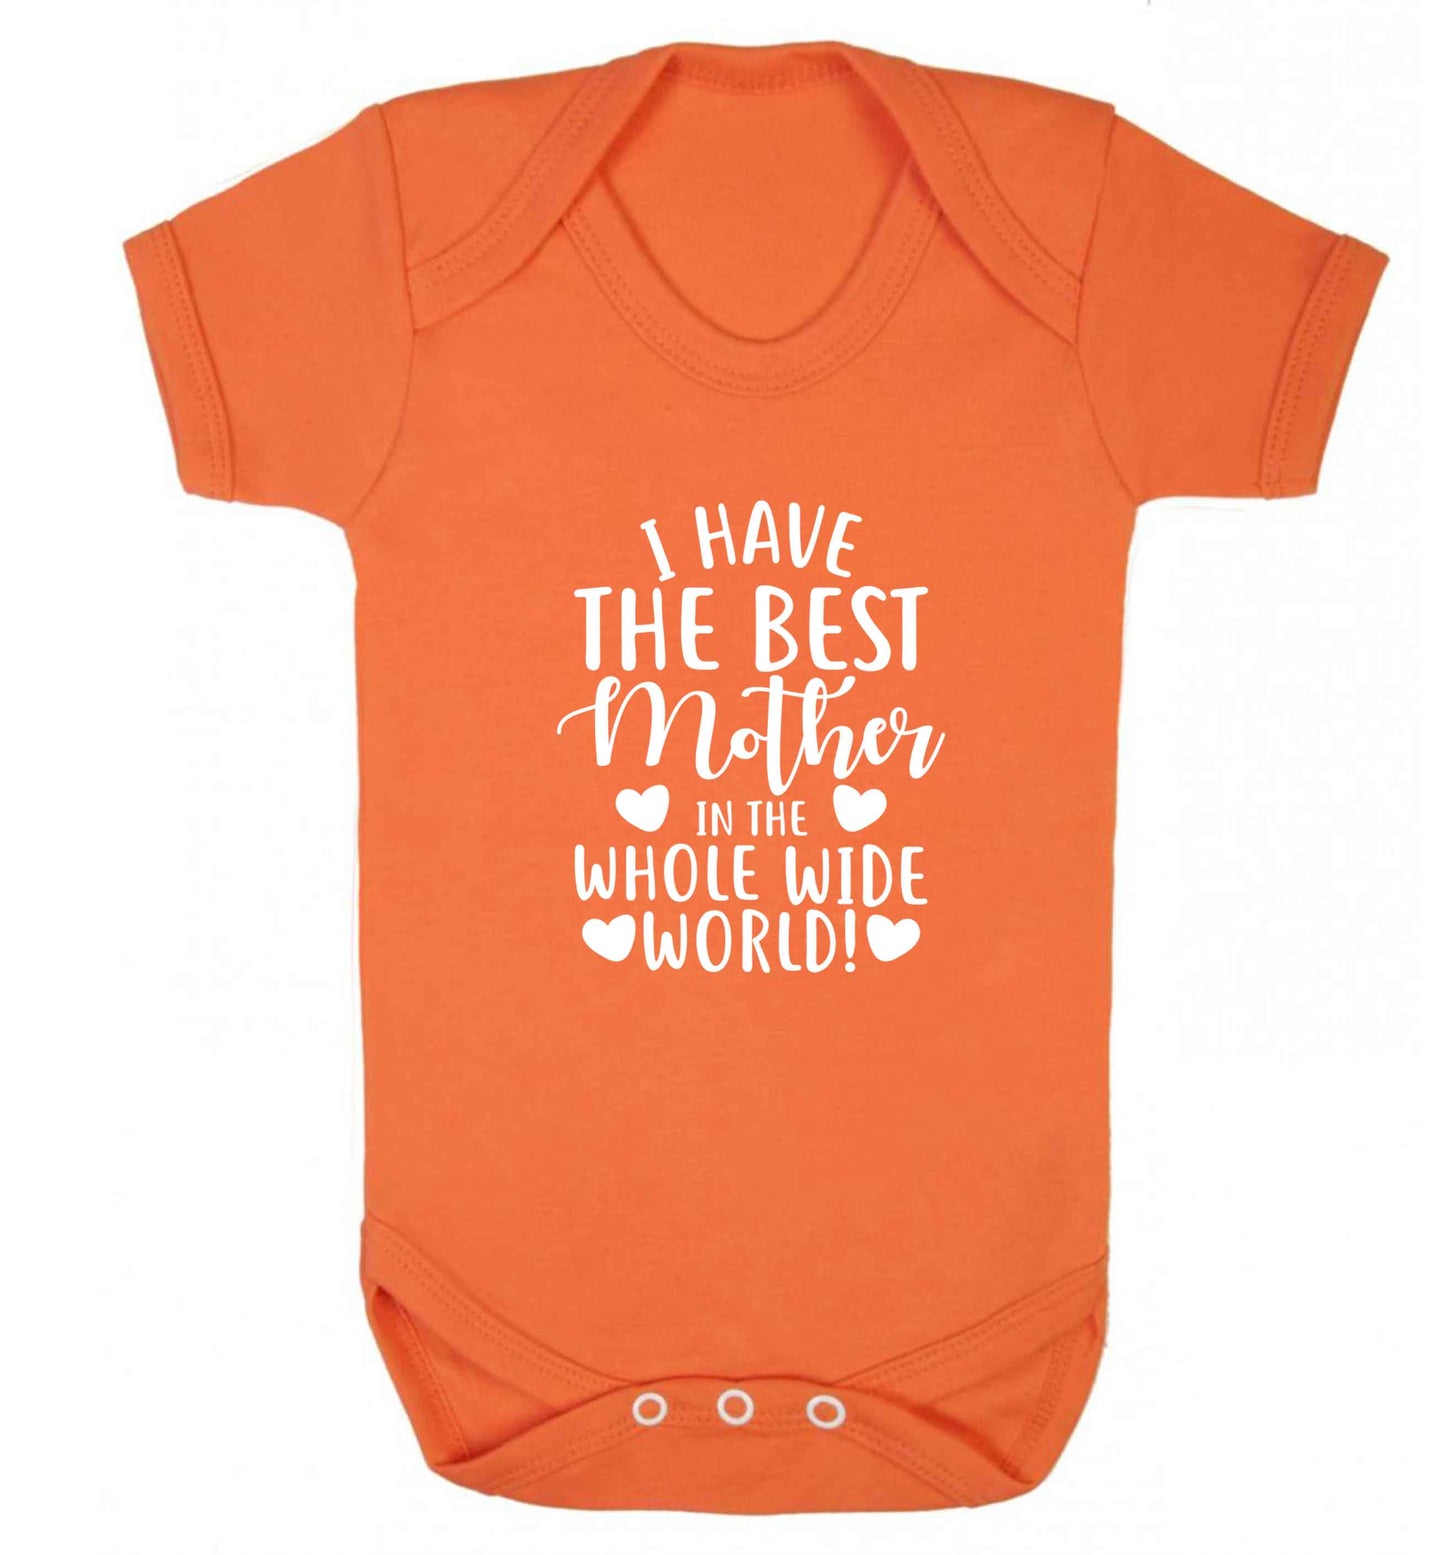 I have the best mother in the whole wide world baby vest orange 18-24 months